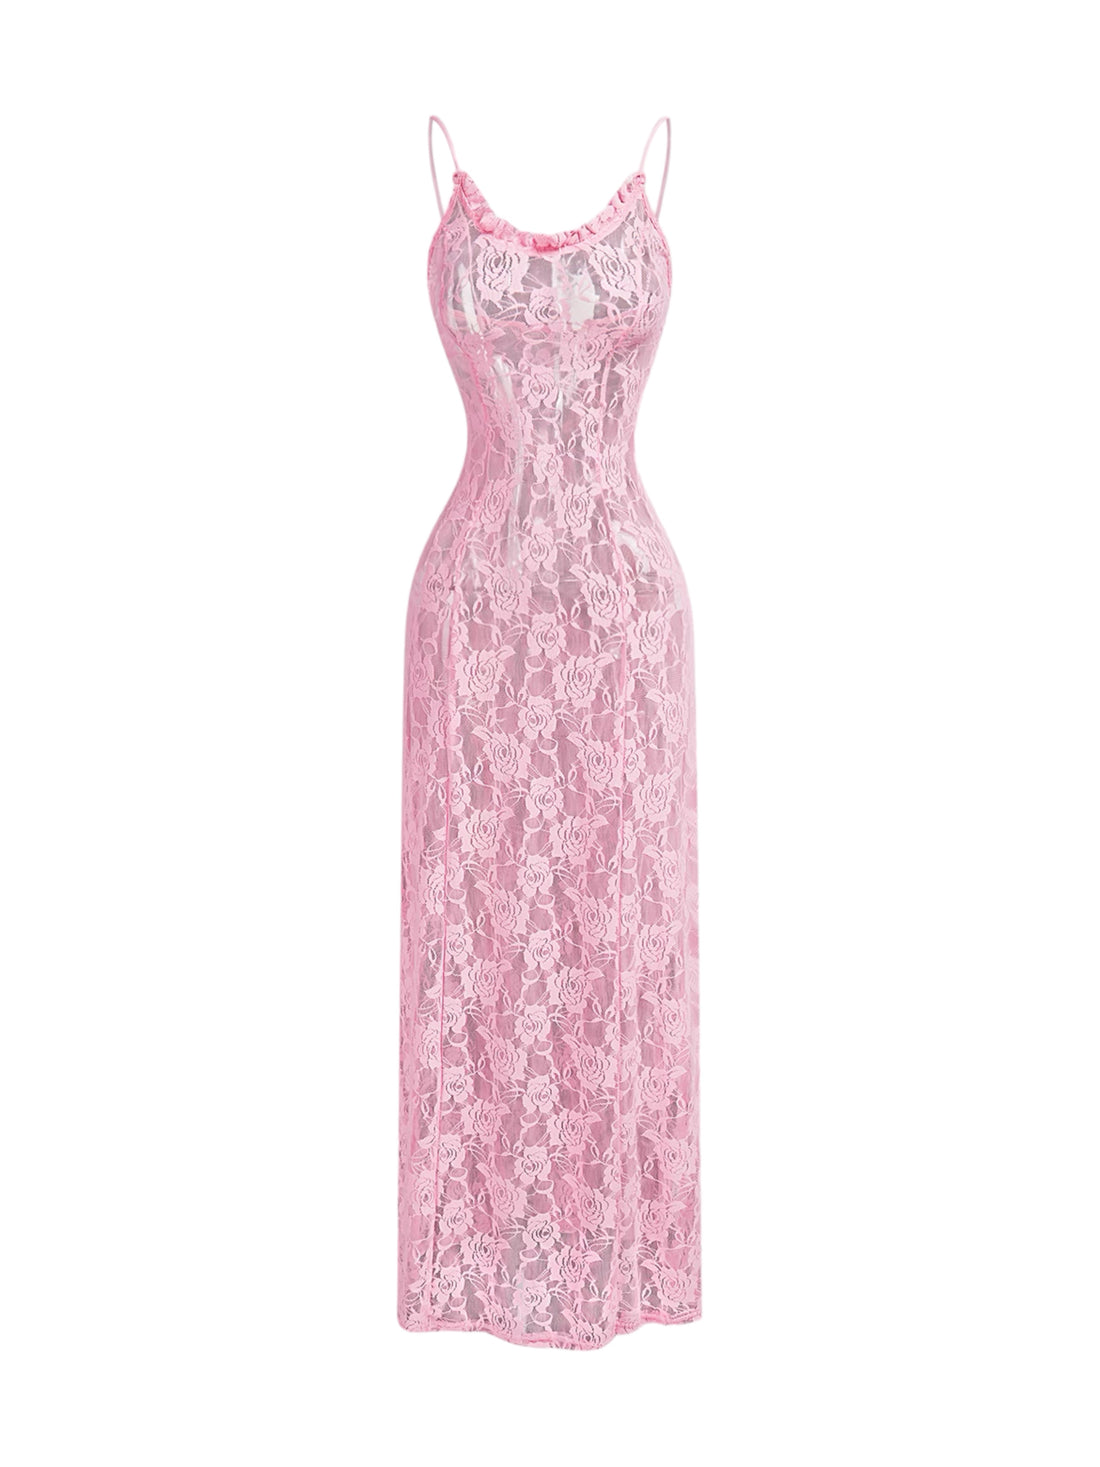 Lace See through Maxi Dress - Mabel Love Co